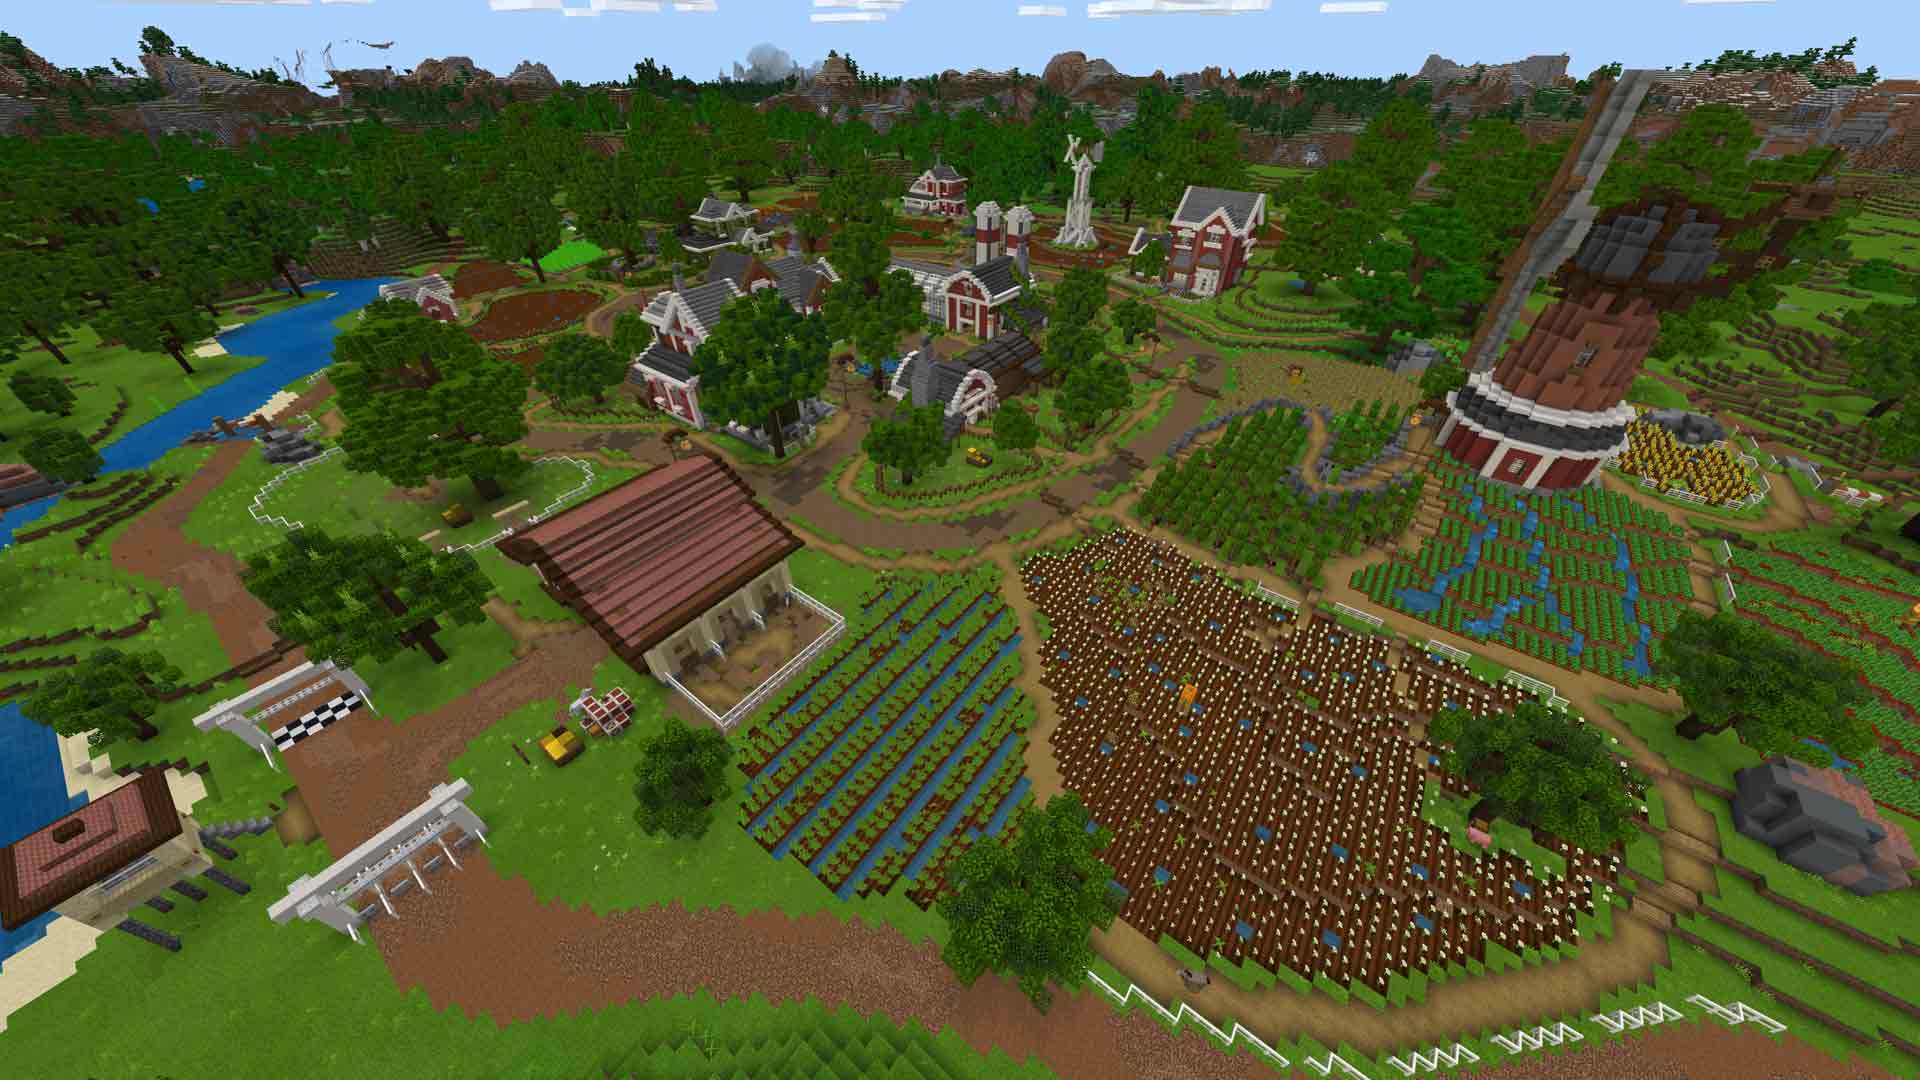 Minecraft Farm Life - Roleplay Review.